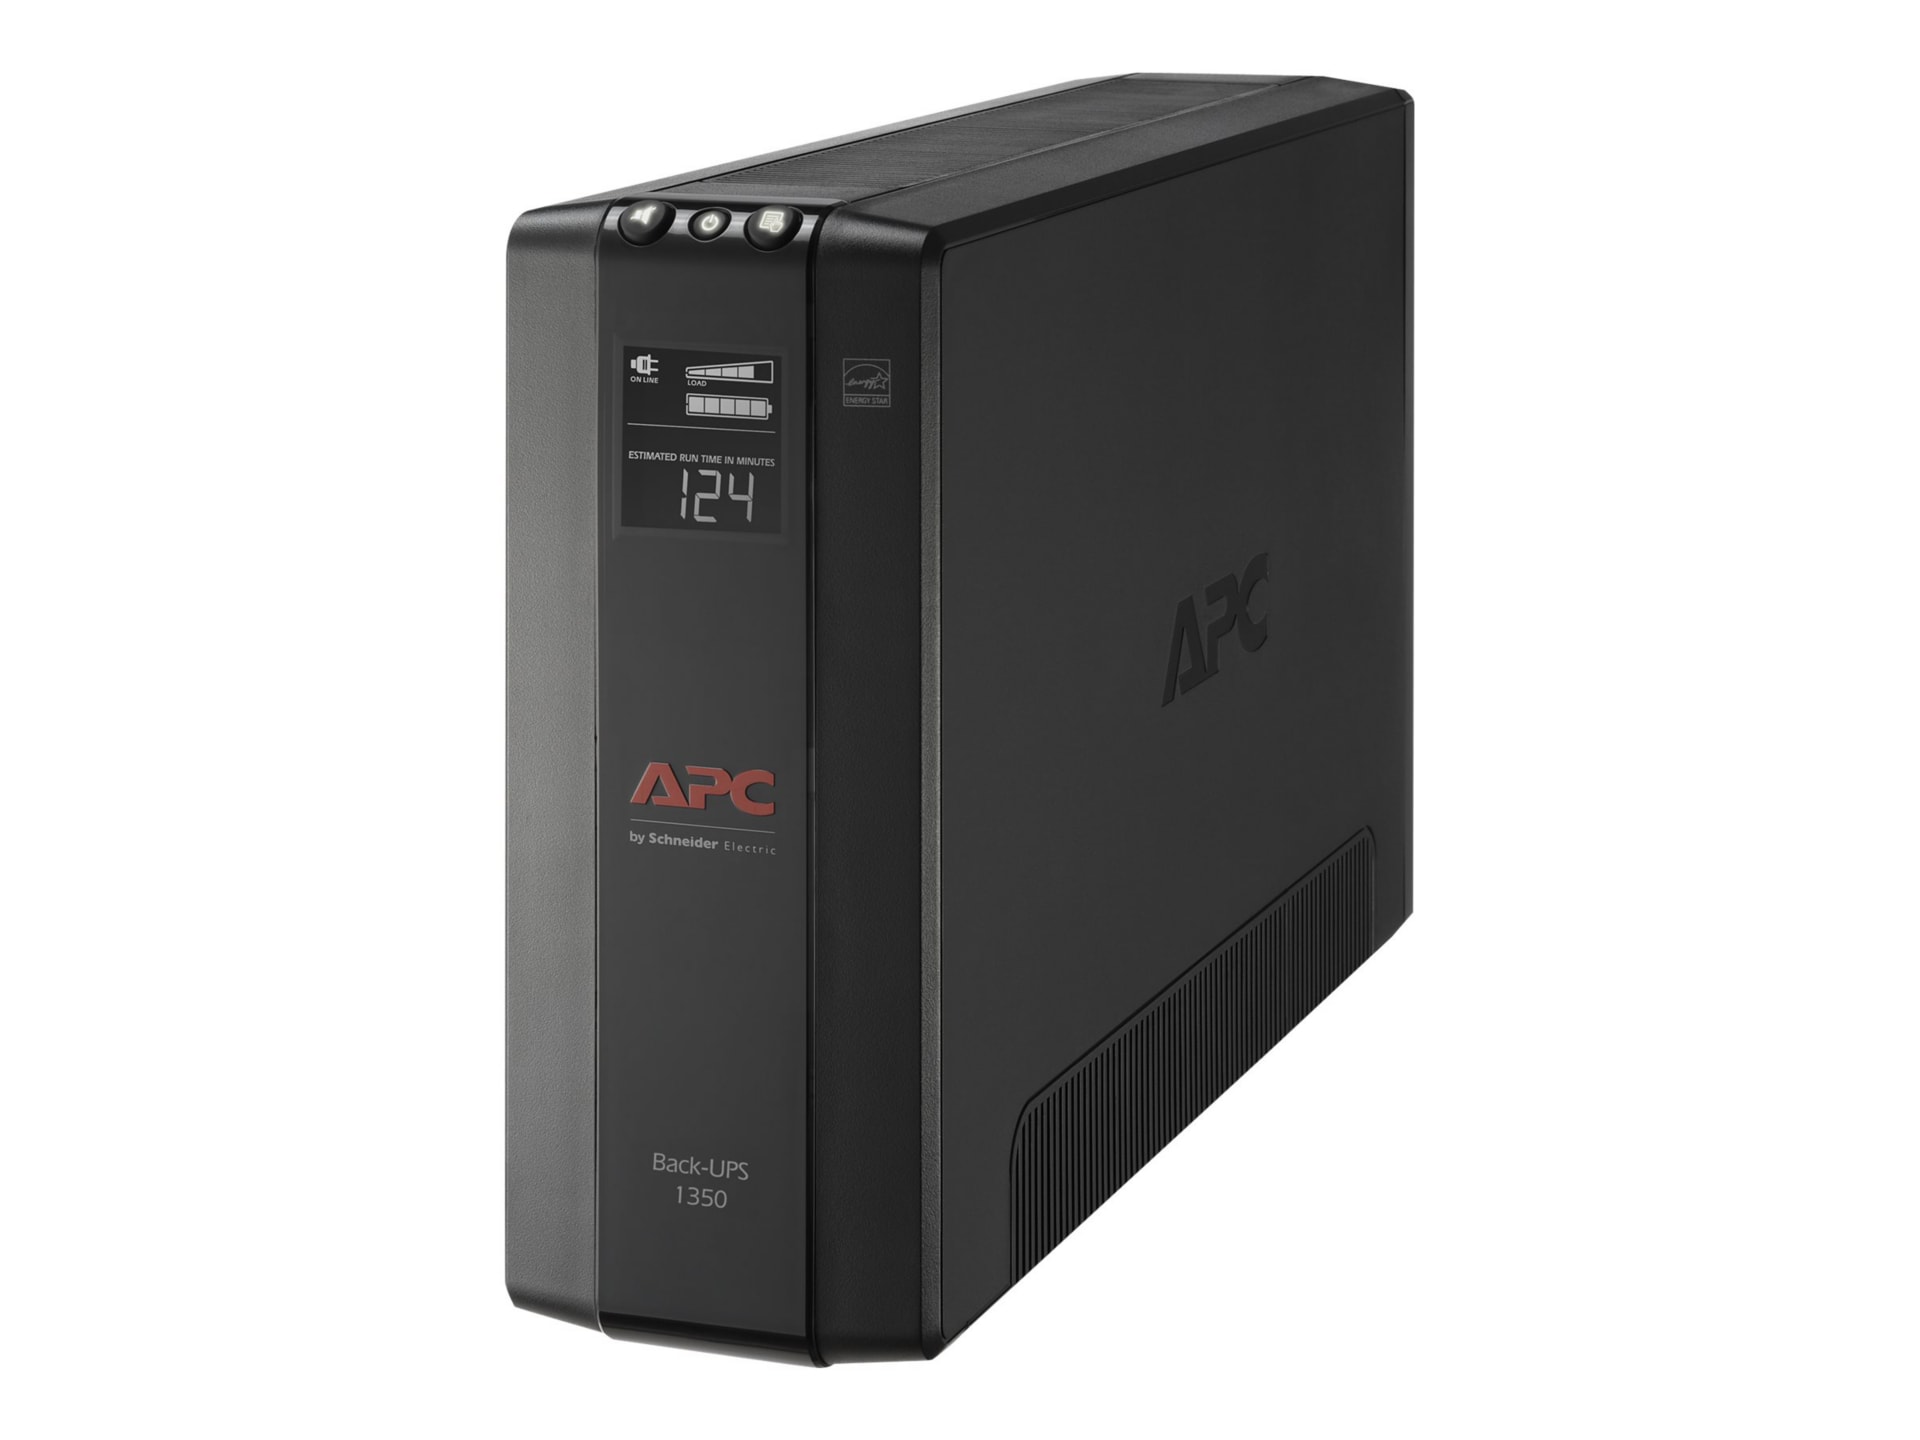 APC Back-UPS Pro Compact 1350VA 10-Outlet Battery Back-Up + Surge Protector